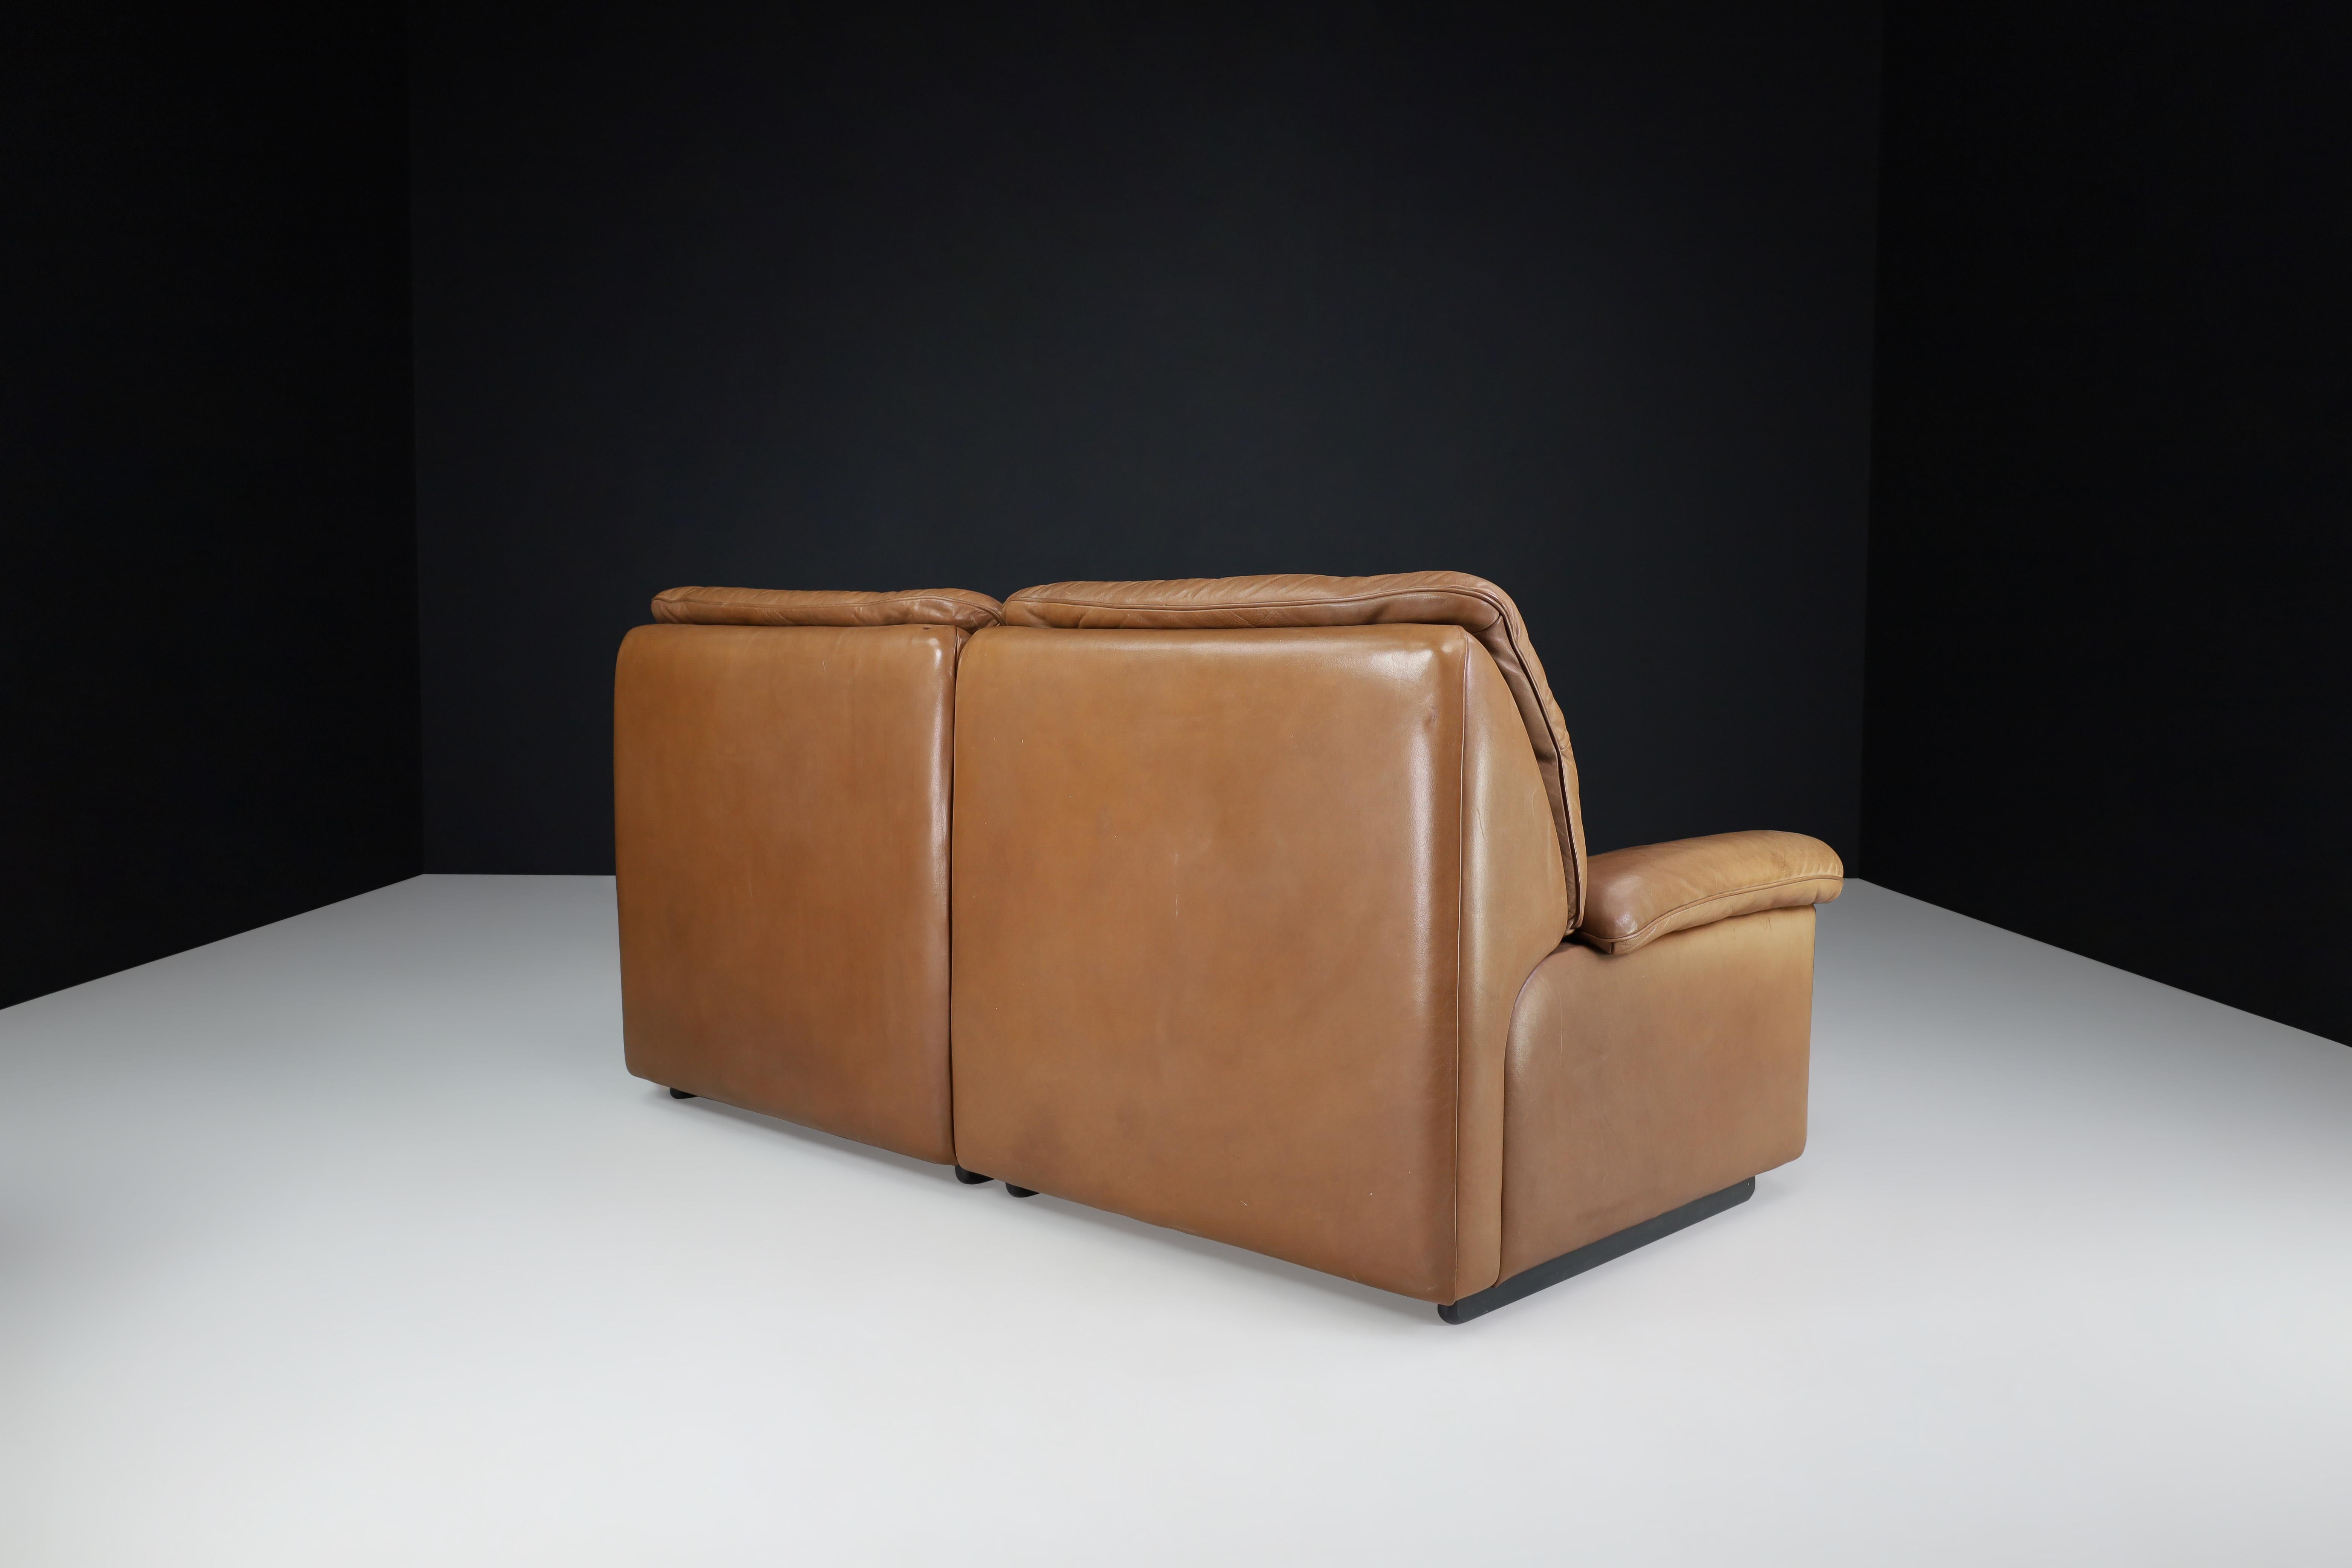 Beech De Sede DS 63 Two-Seater Sofa in Patinated Leather, Switzerland, 1970s For Sale